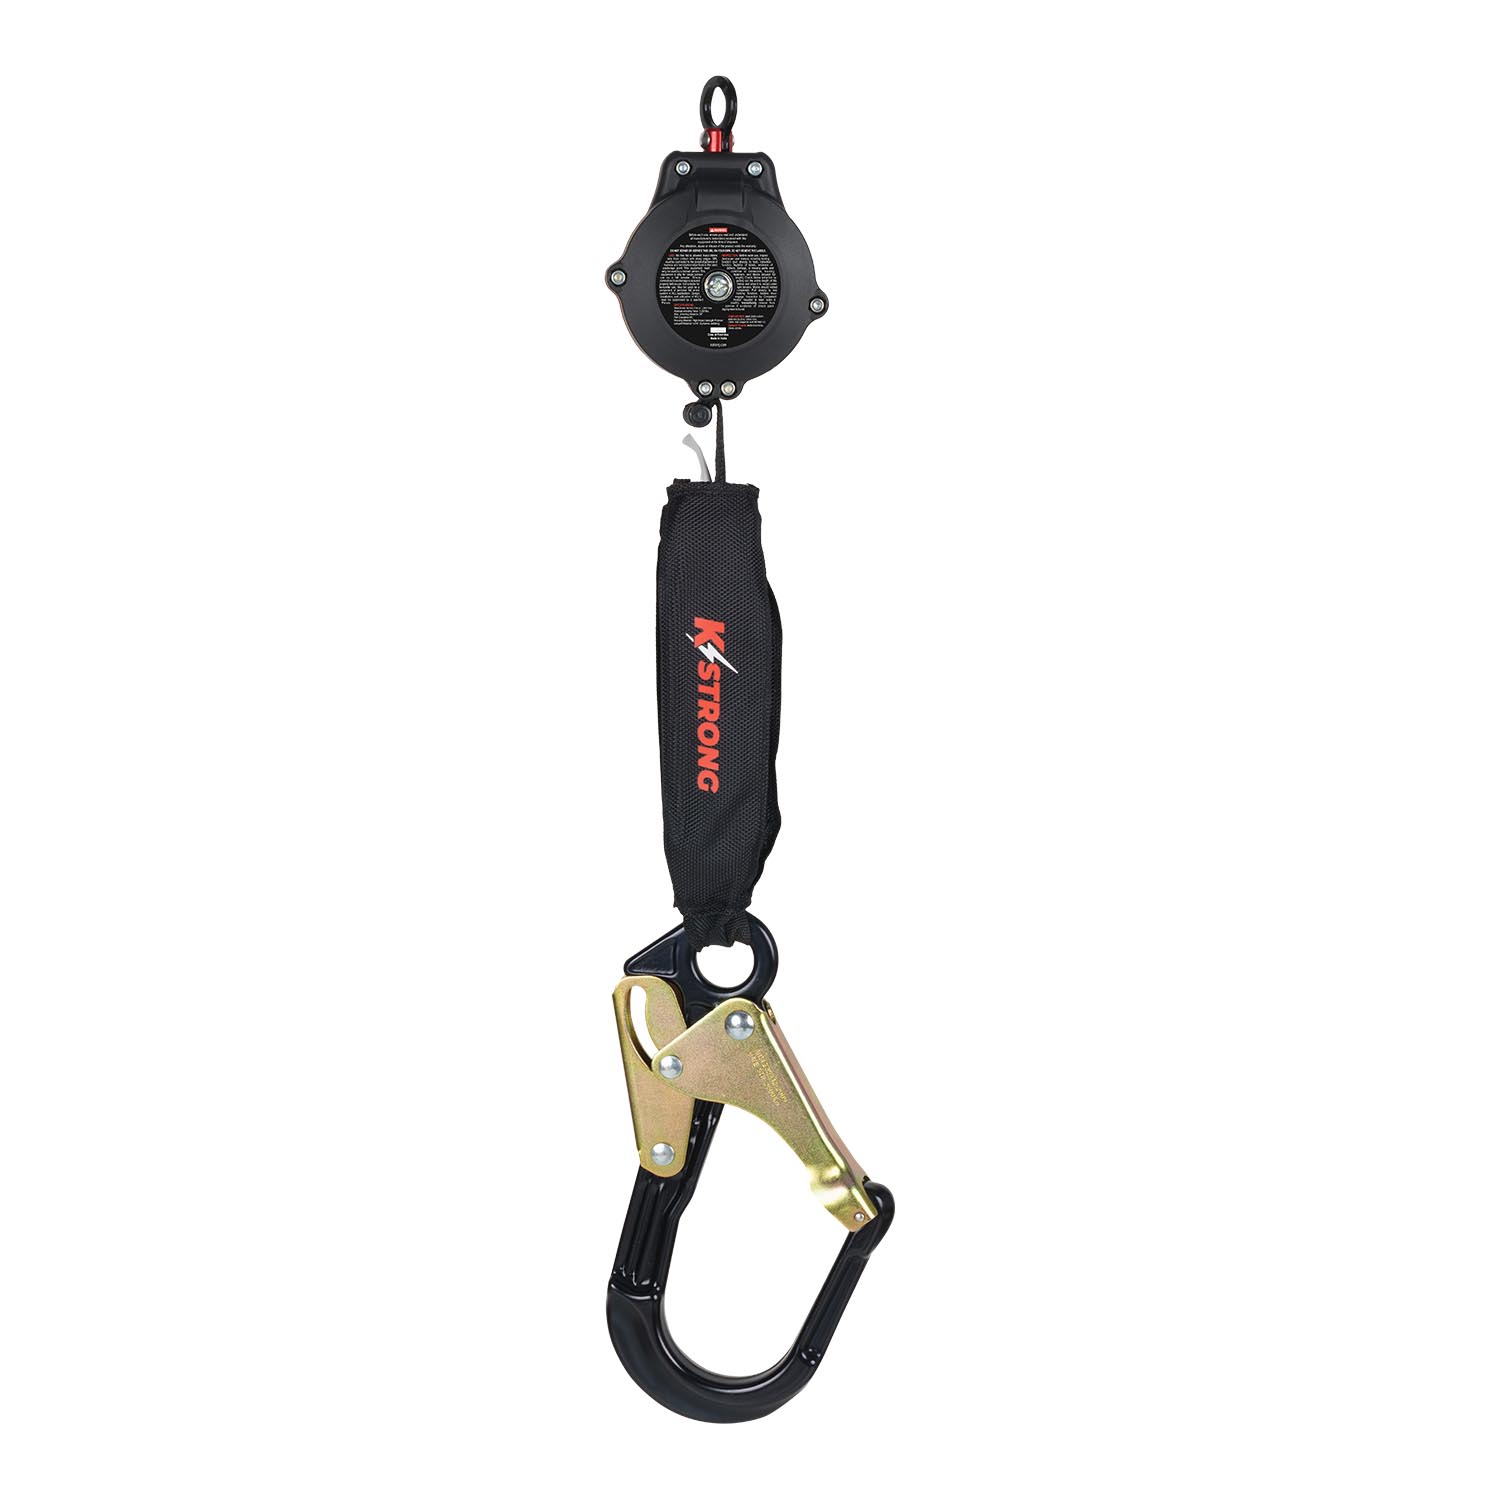 KStrong Kaptor Single Leg Tool Lanyard with Webbing Loop at Tool End and Connector at Other End - 22 lbs. ANSI DL100041